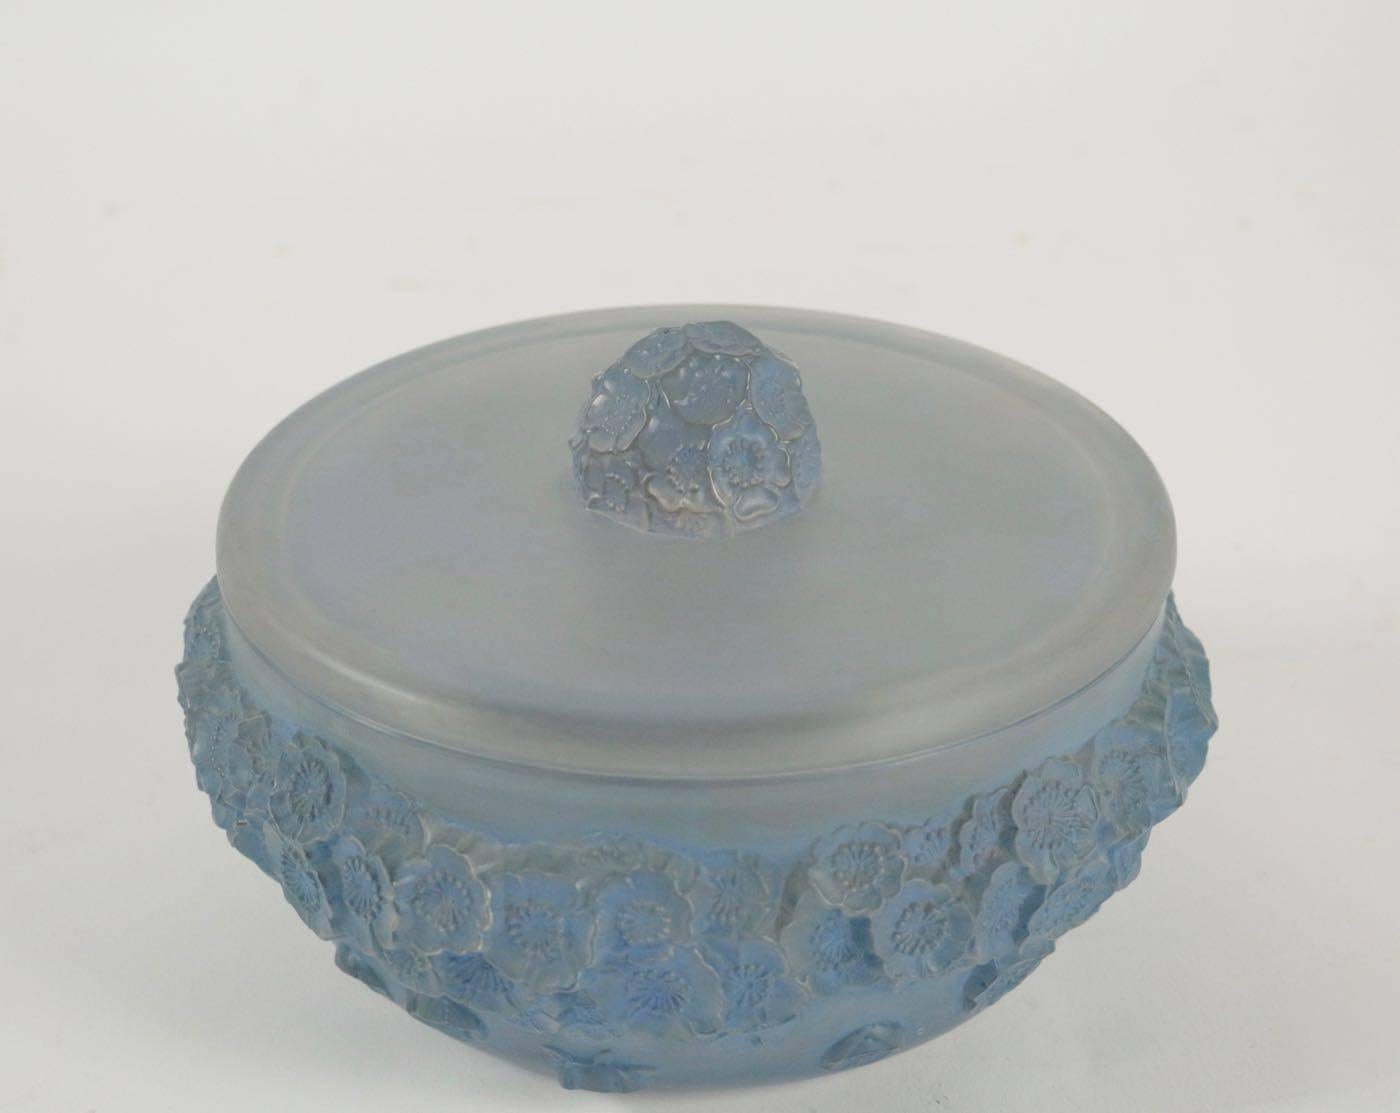 René Lalique (1860-1945), box Primevères
Frosted heavy glass the bowl form bottom with a relief floral decoration circling around the entire side, and the undecorated flat lid with a matching motif central dome shaped handle R. Lalique Box. Model: